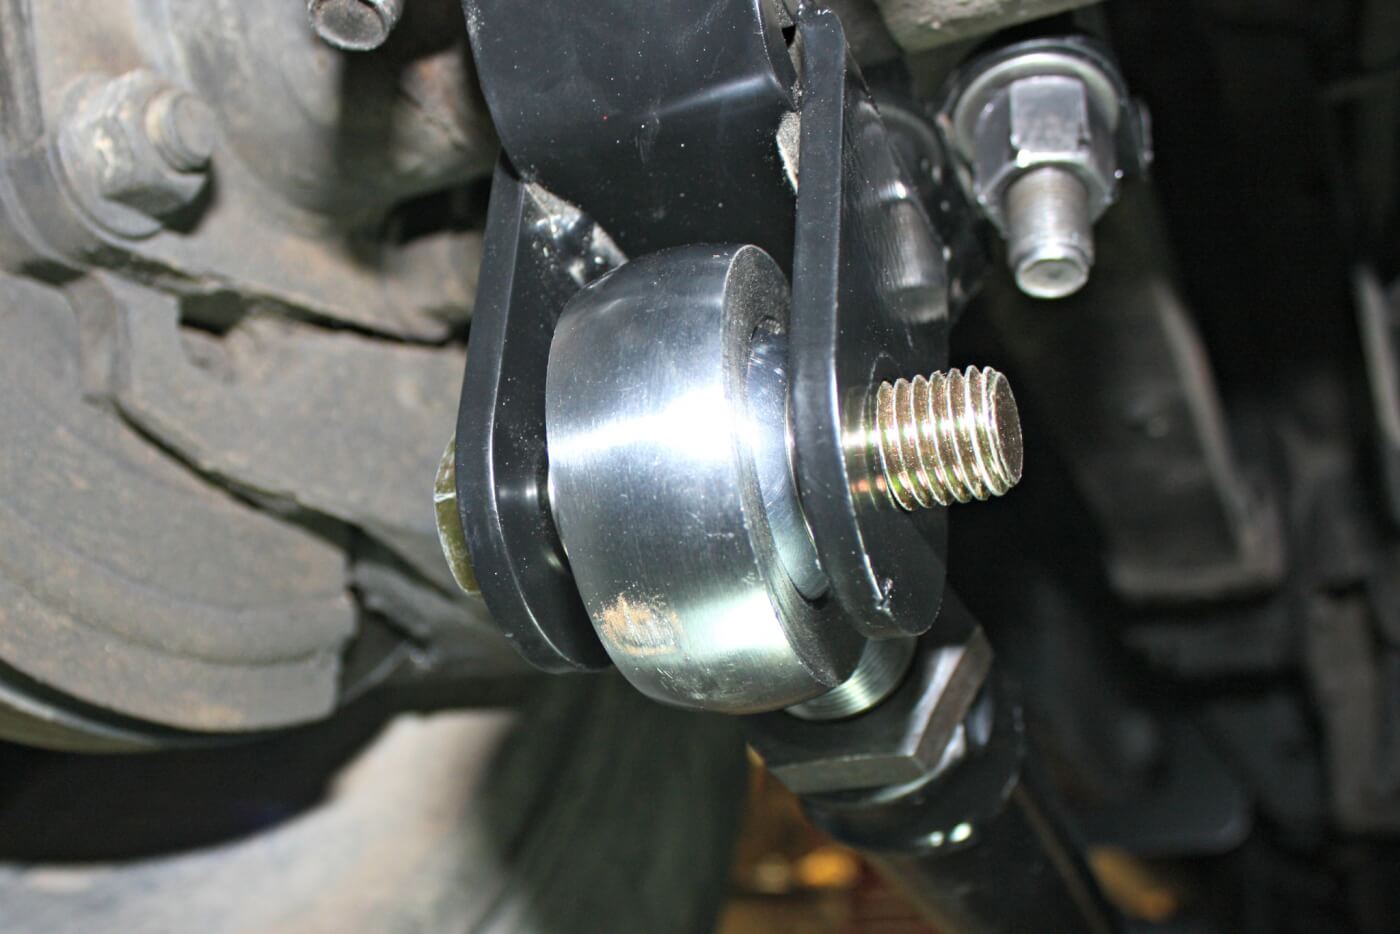 9. With the rod ends installed, the bards can be placed under the truck and the Grade 8 ¾-inch bolt slipped through the axle bracket and rod end holding the axle end of the bar in place. No need to tighten the bolt just yet, as the bars may come back out a couple times before final installation.